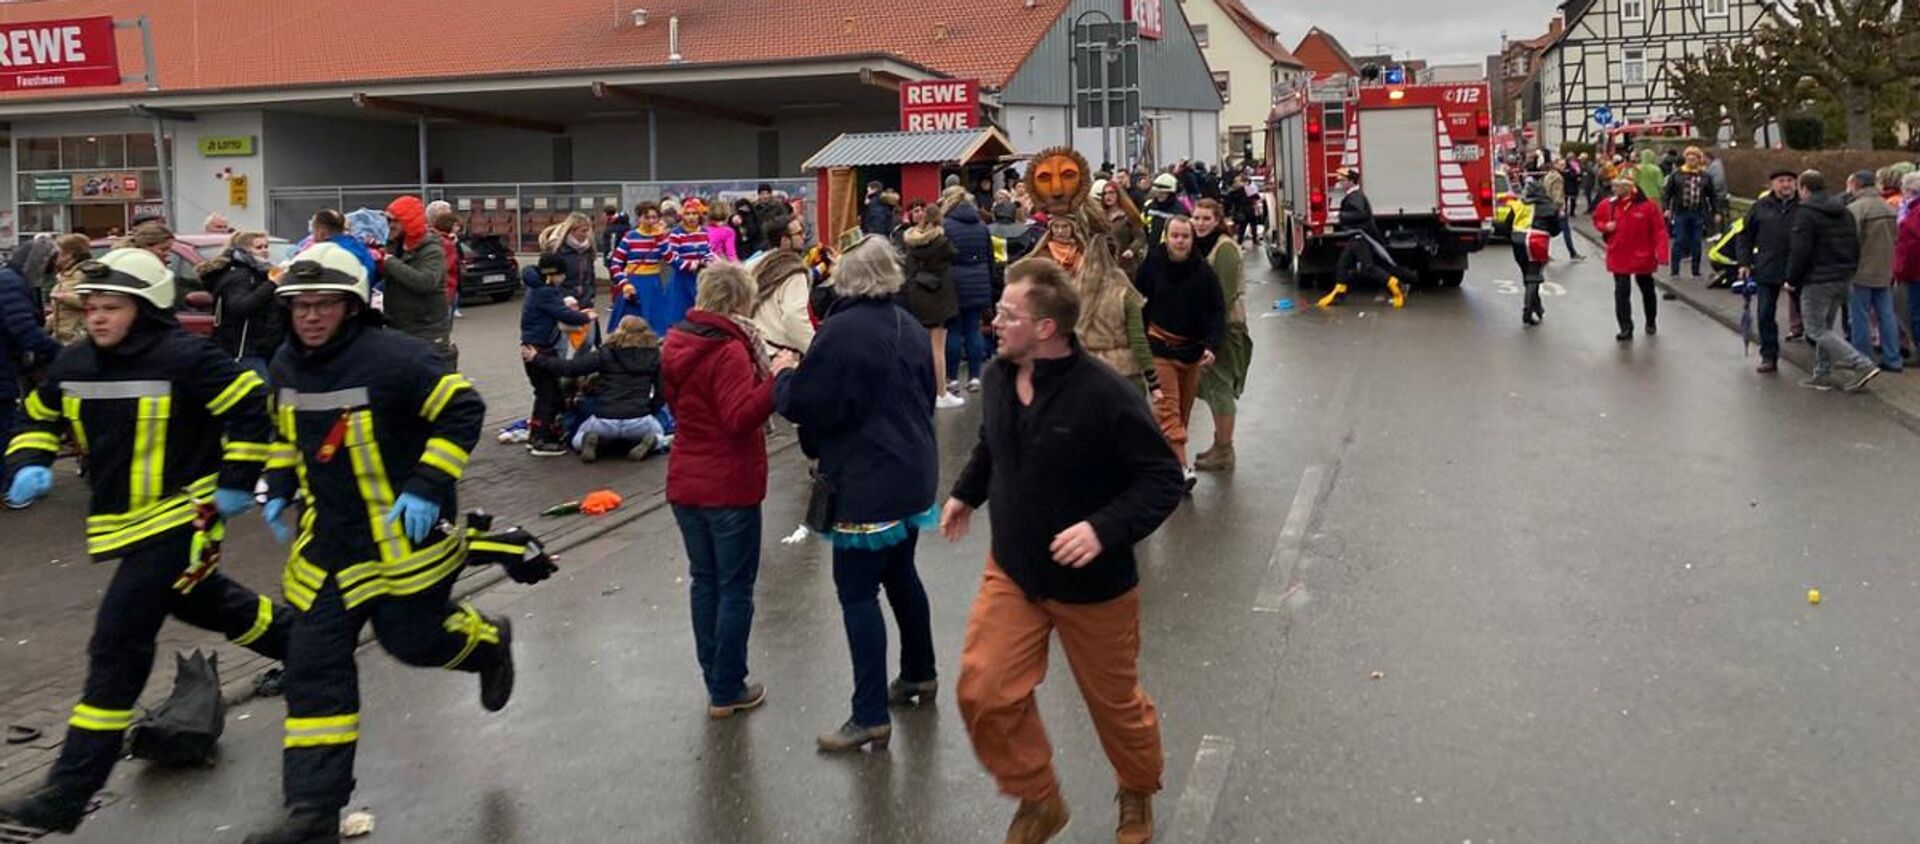 People react at the scene after a car ploughed into a carnival parade injuring several people in Volkmarsen, Germany February 24, 2020 - Sputnik International, 1920, 24.02.2020